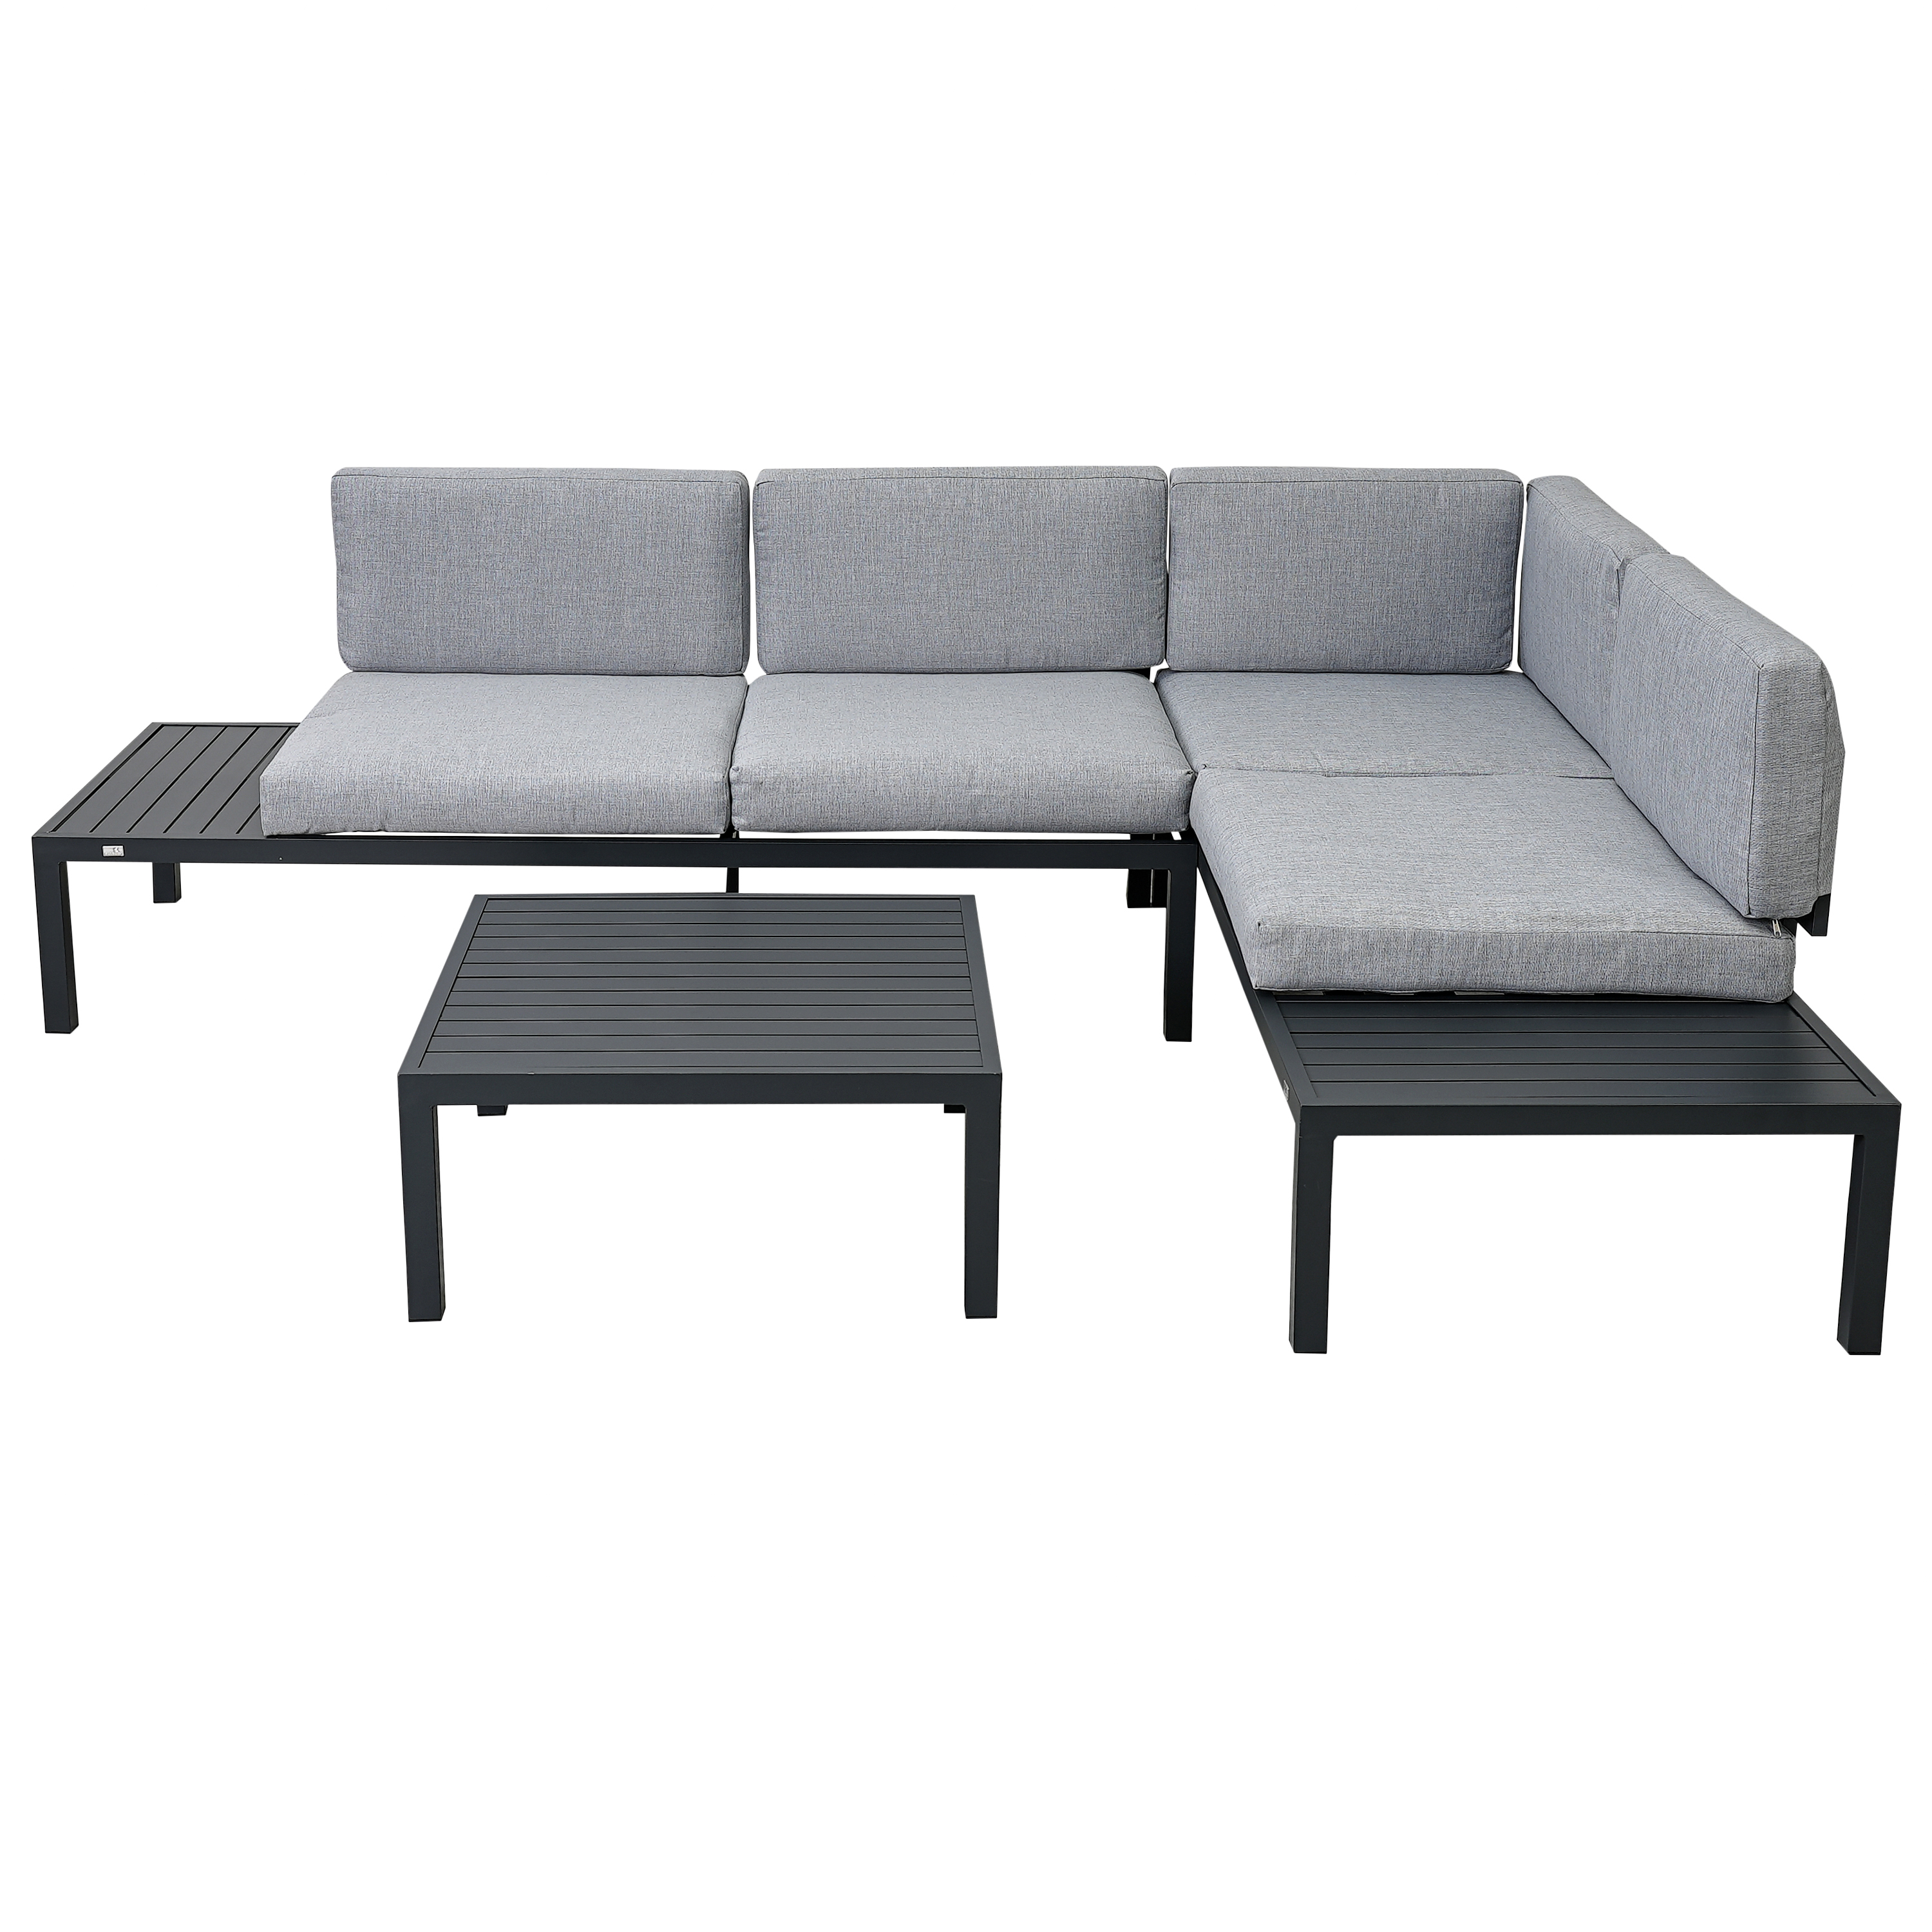 Outdoor 3-piece Aluminum Alloy Sectional Sofa Set with End Table and Coffee Table,Black Frame+Gray Cushion-Boyel Living